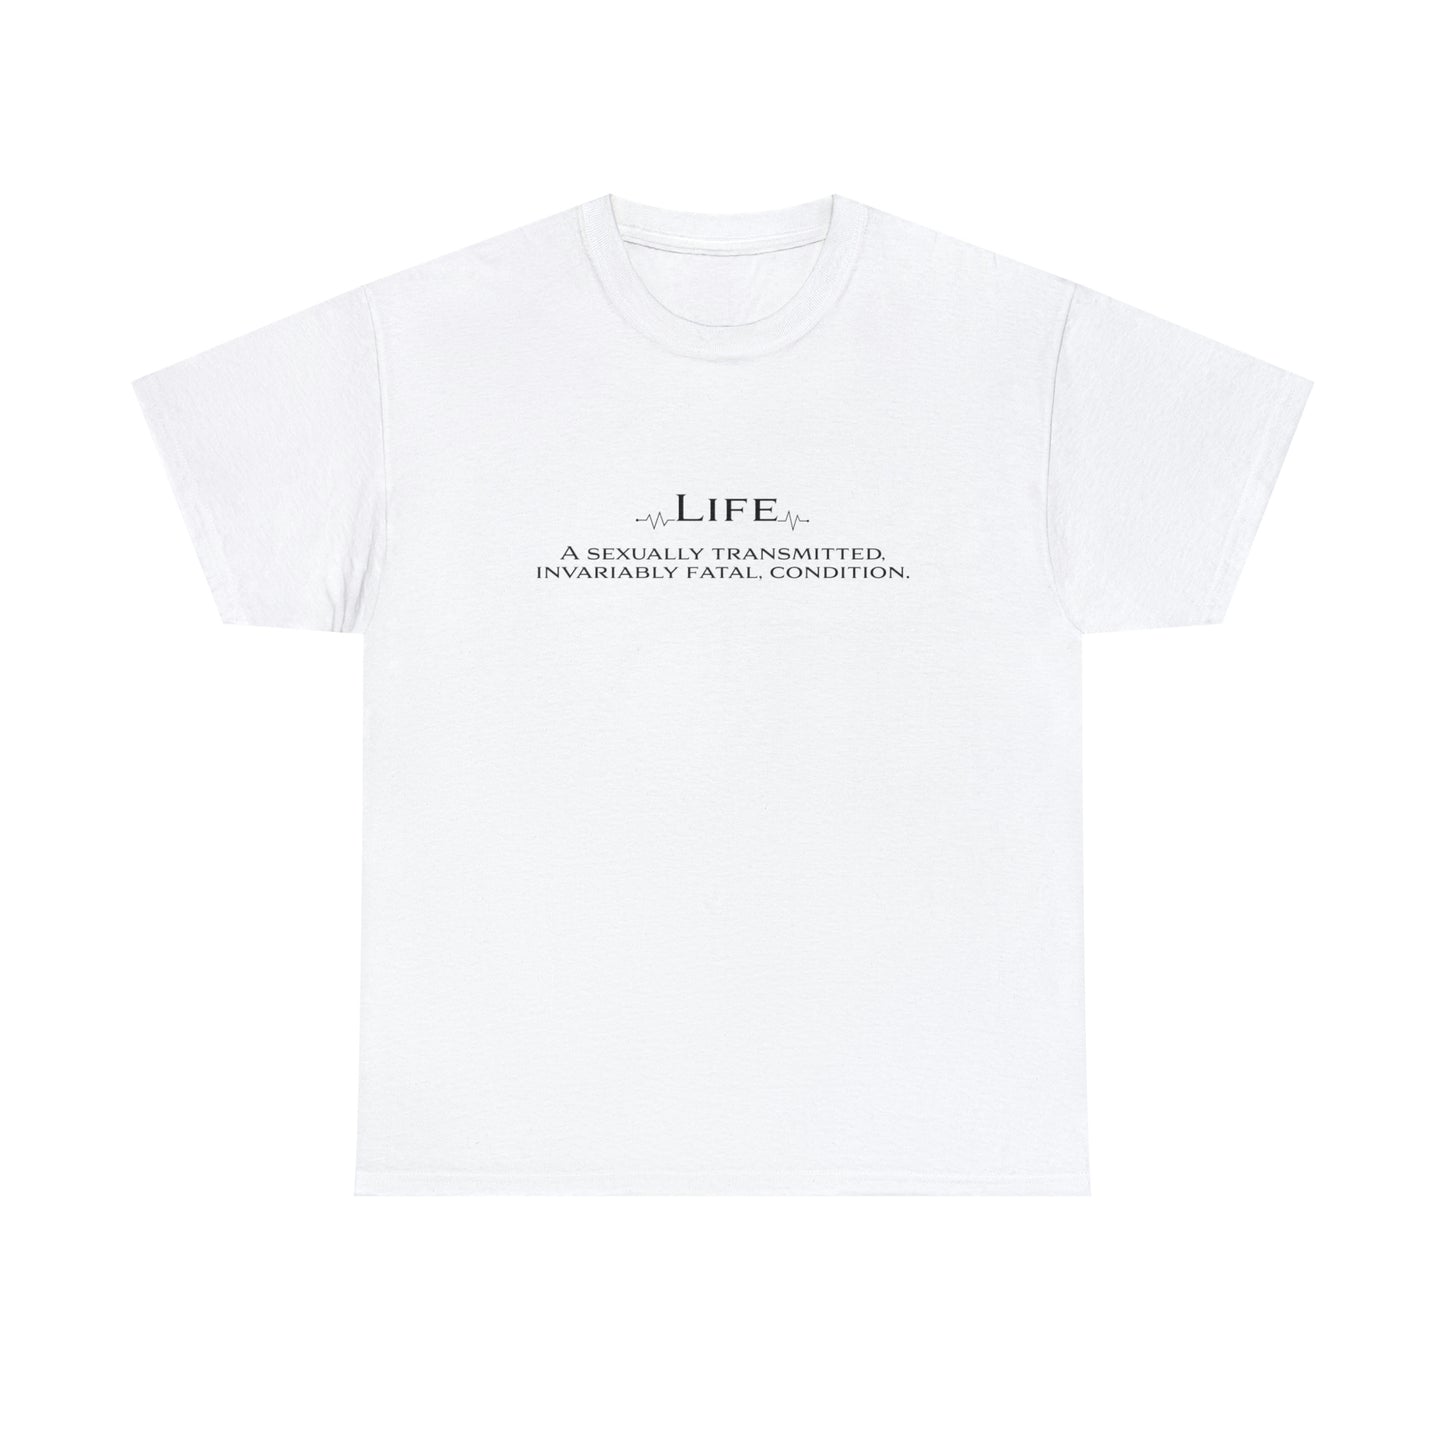 Life DefinitionT-Shirt For Life TShirt For Ironic T Shirt For Life and Death Shirt For Sarcastic Tee For Sarcastic  Gift TShirt